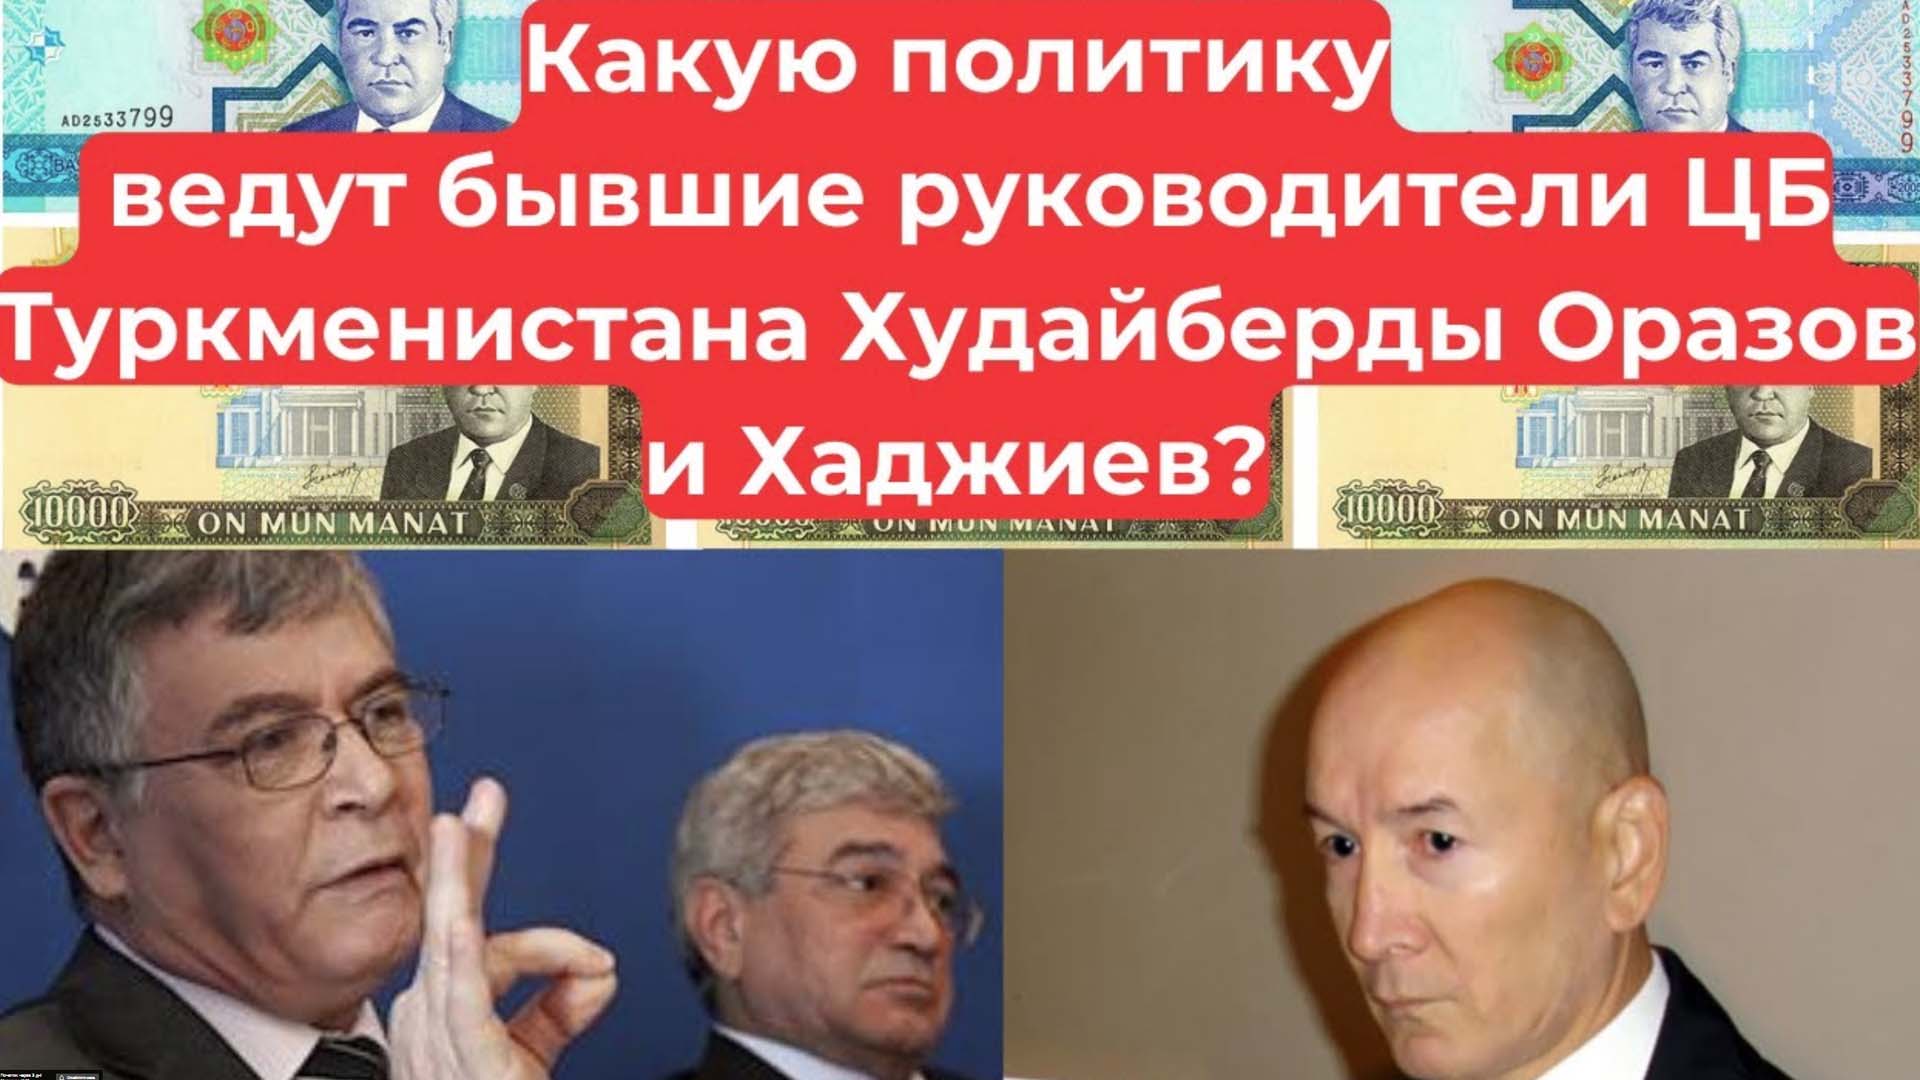 What policy are the former heads of the Central Bank of Turkmenistan Khudaiberdy Orazov and Khadzhiev pursuing?